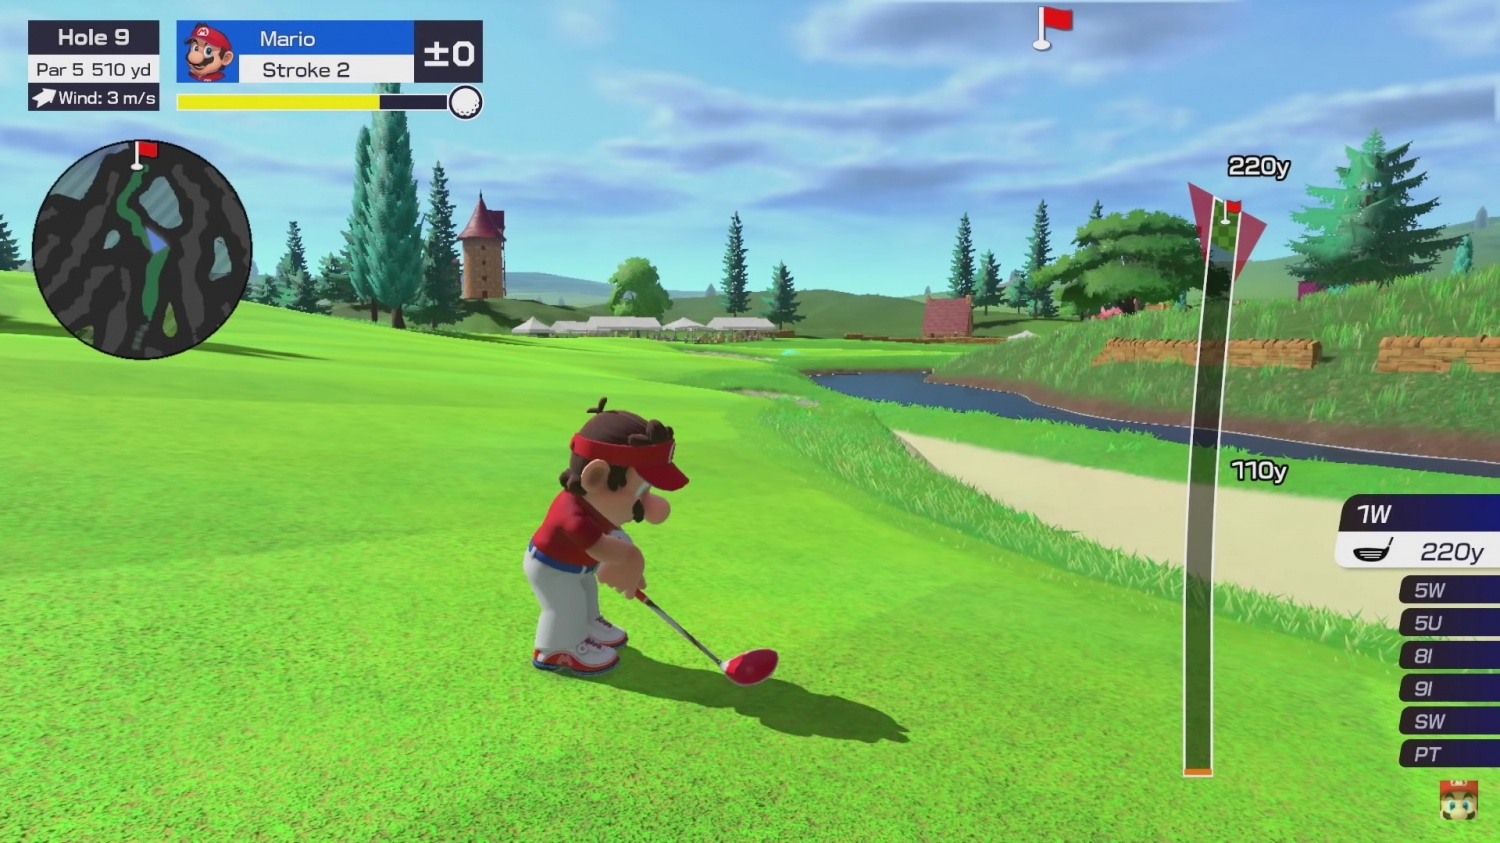 'Mario Golf Super Rush' To Be Playable in Nintendo Switch on June 25: Know About Its Trailer and Gameplay